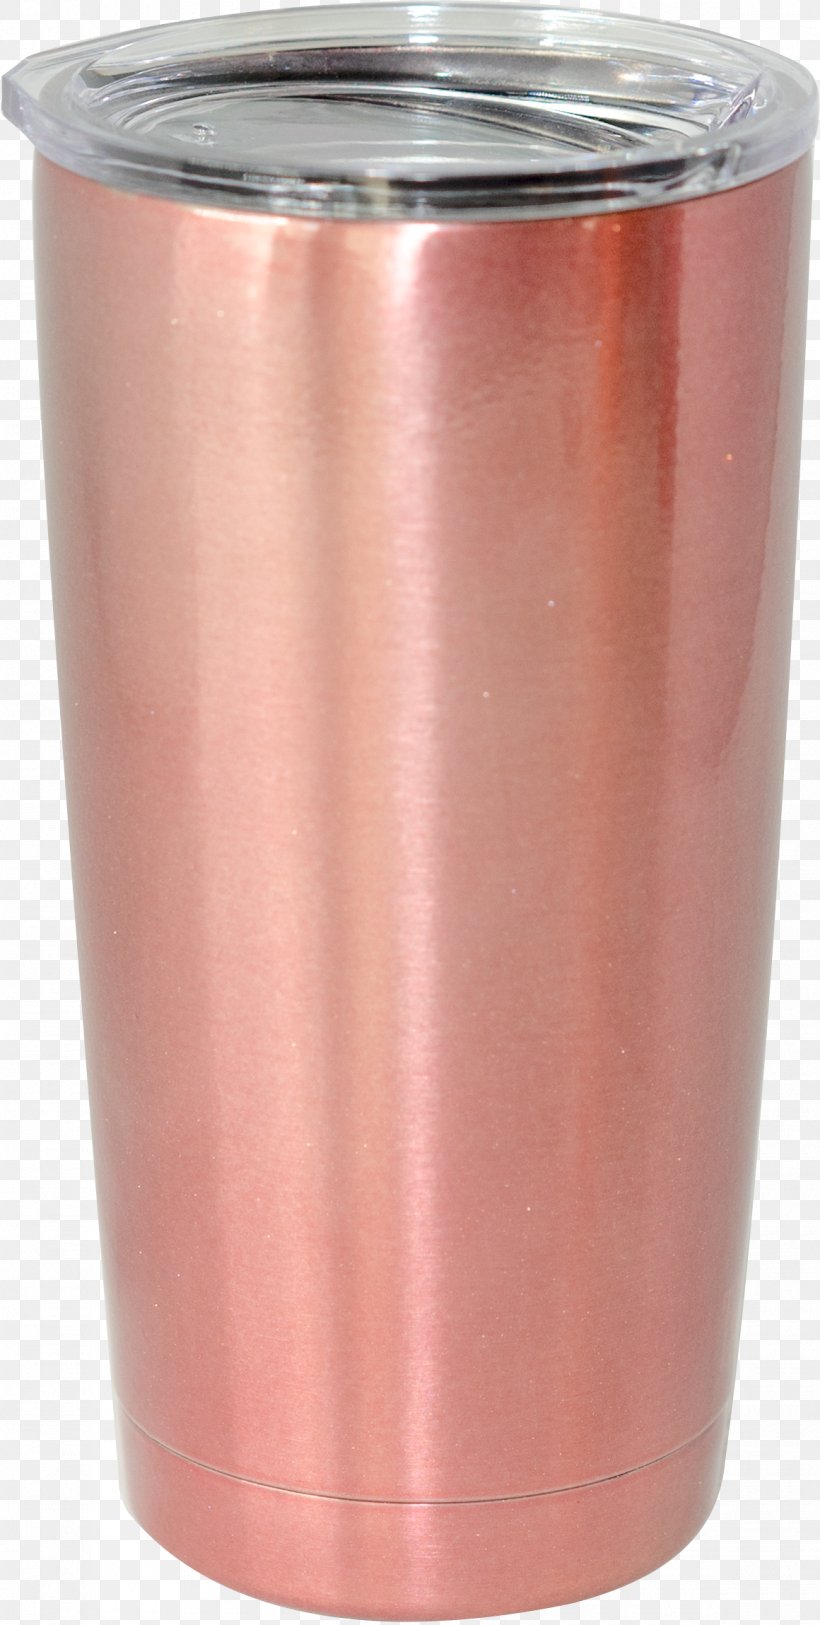 Copper Cylinder, PNG, 1160x2299px, Copper, Cylinder, Metal Download Free